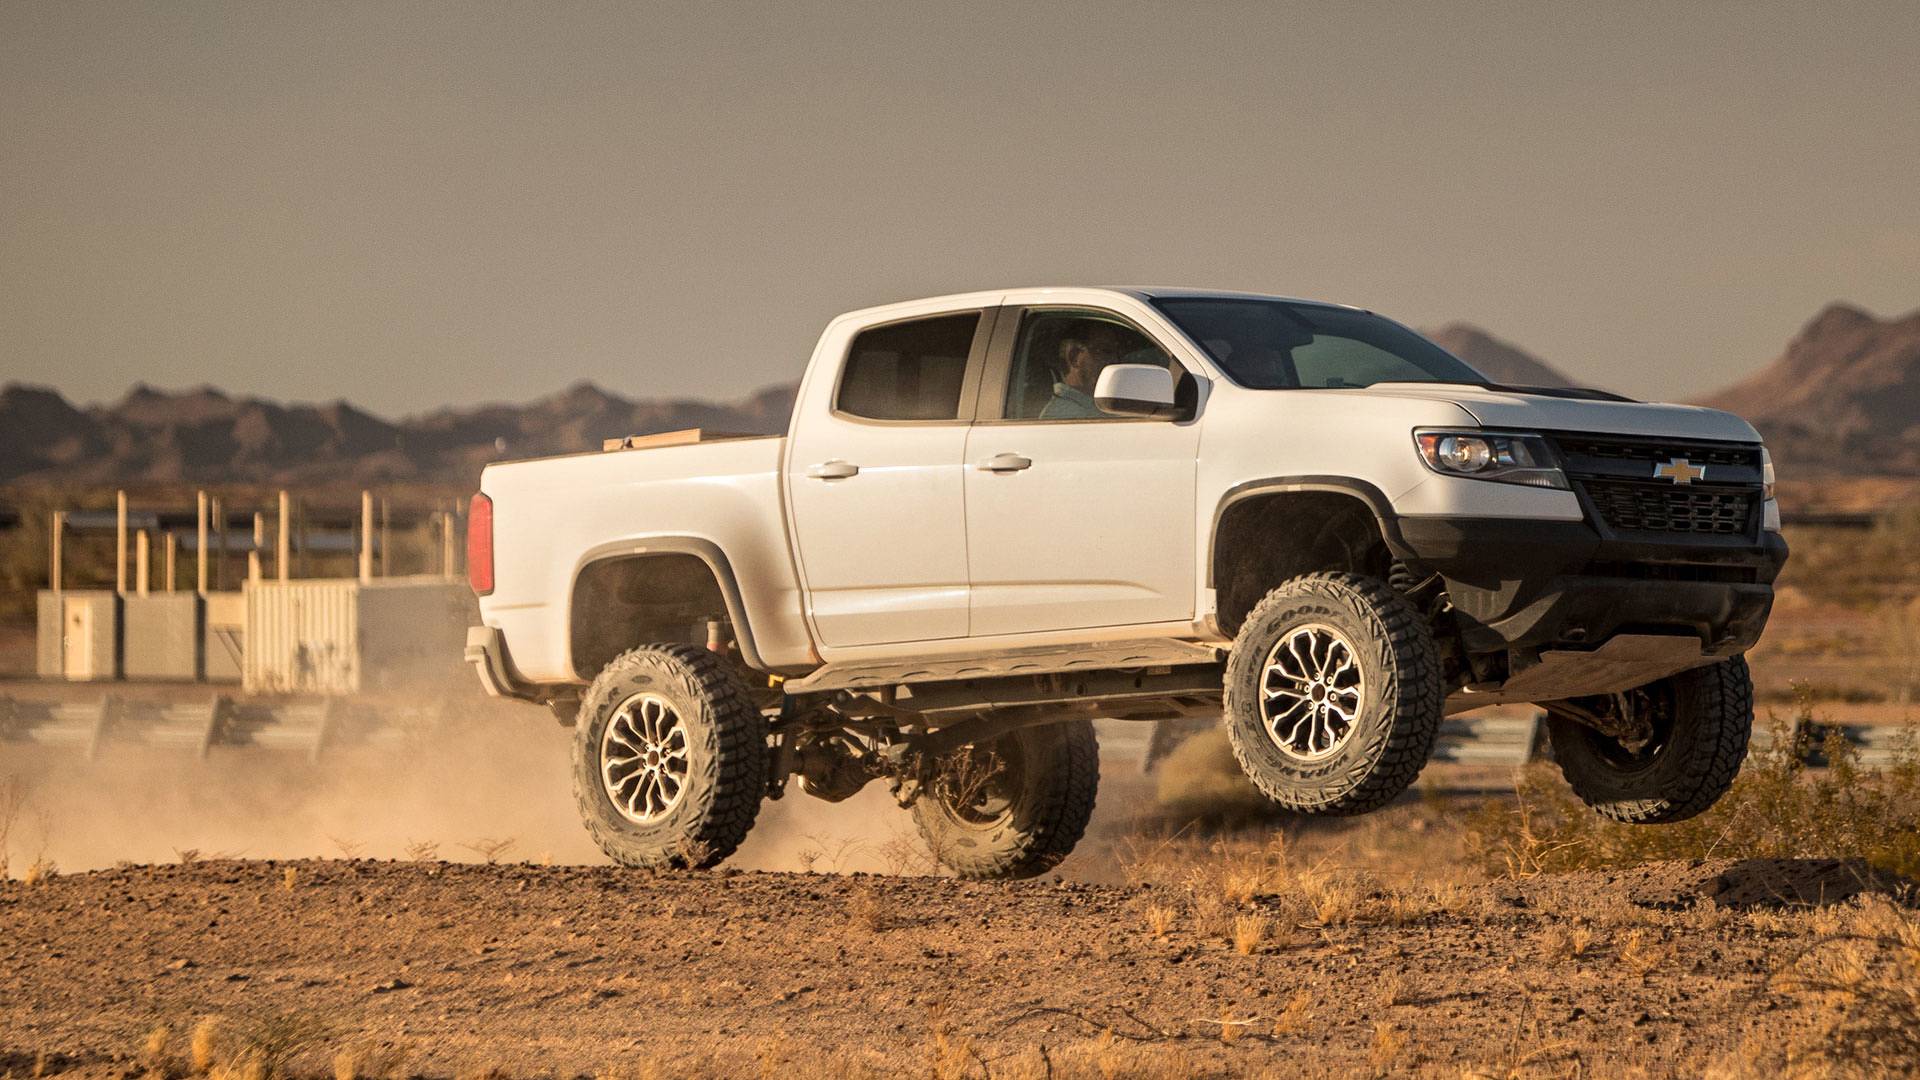 Chevrolet Colorado ZR2 Race Development Truck builds on the ZR2’s desert-running capability. Tuned for high-speed off-road use equipped with unique parts validated by Chevy Performance Engineering.